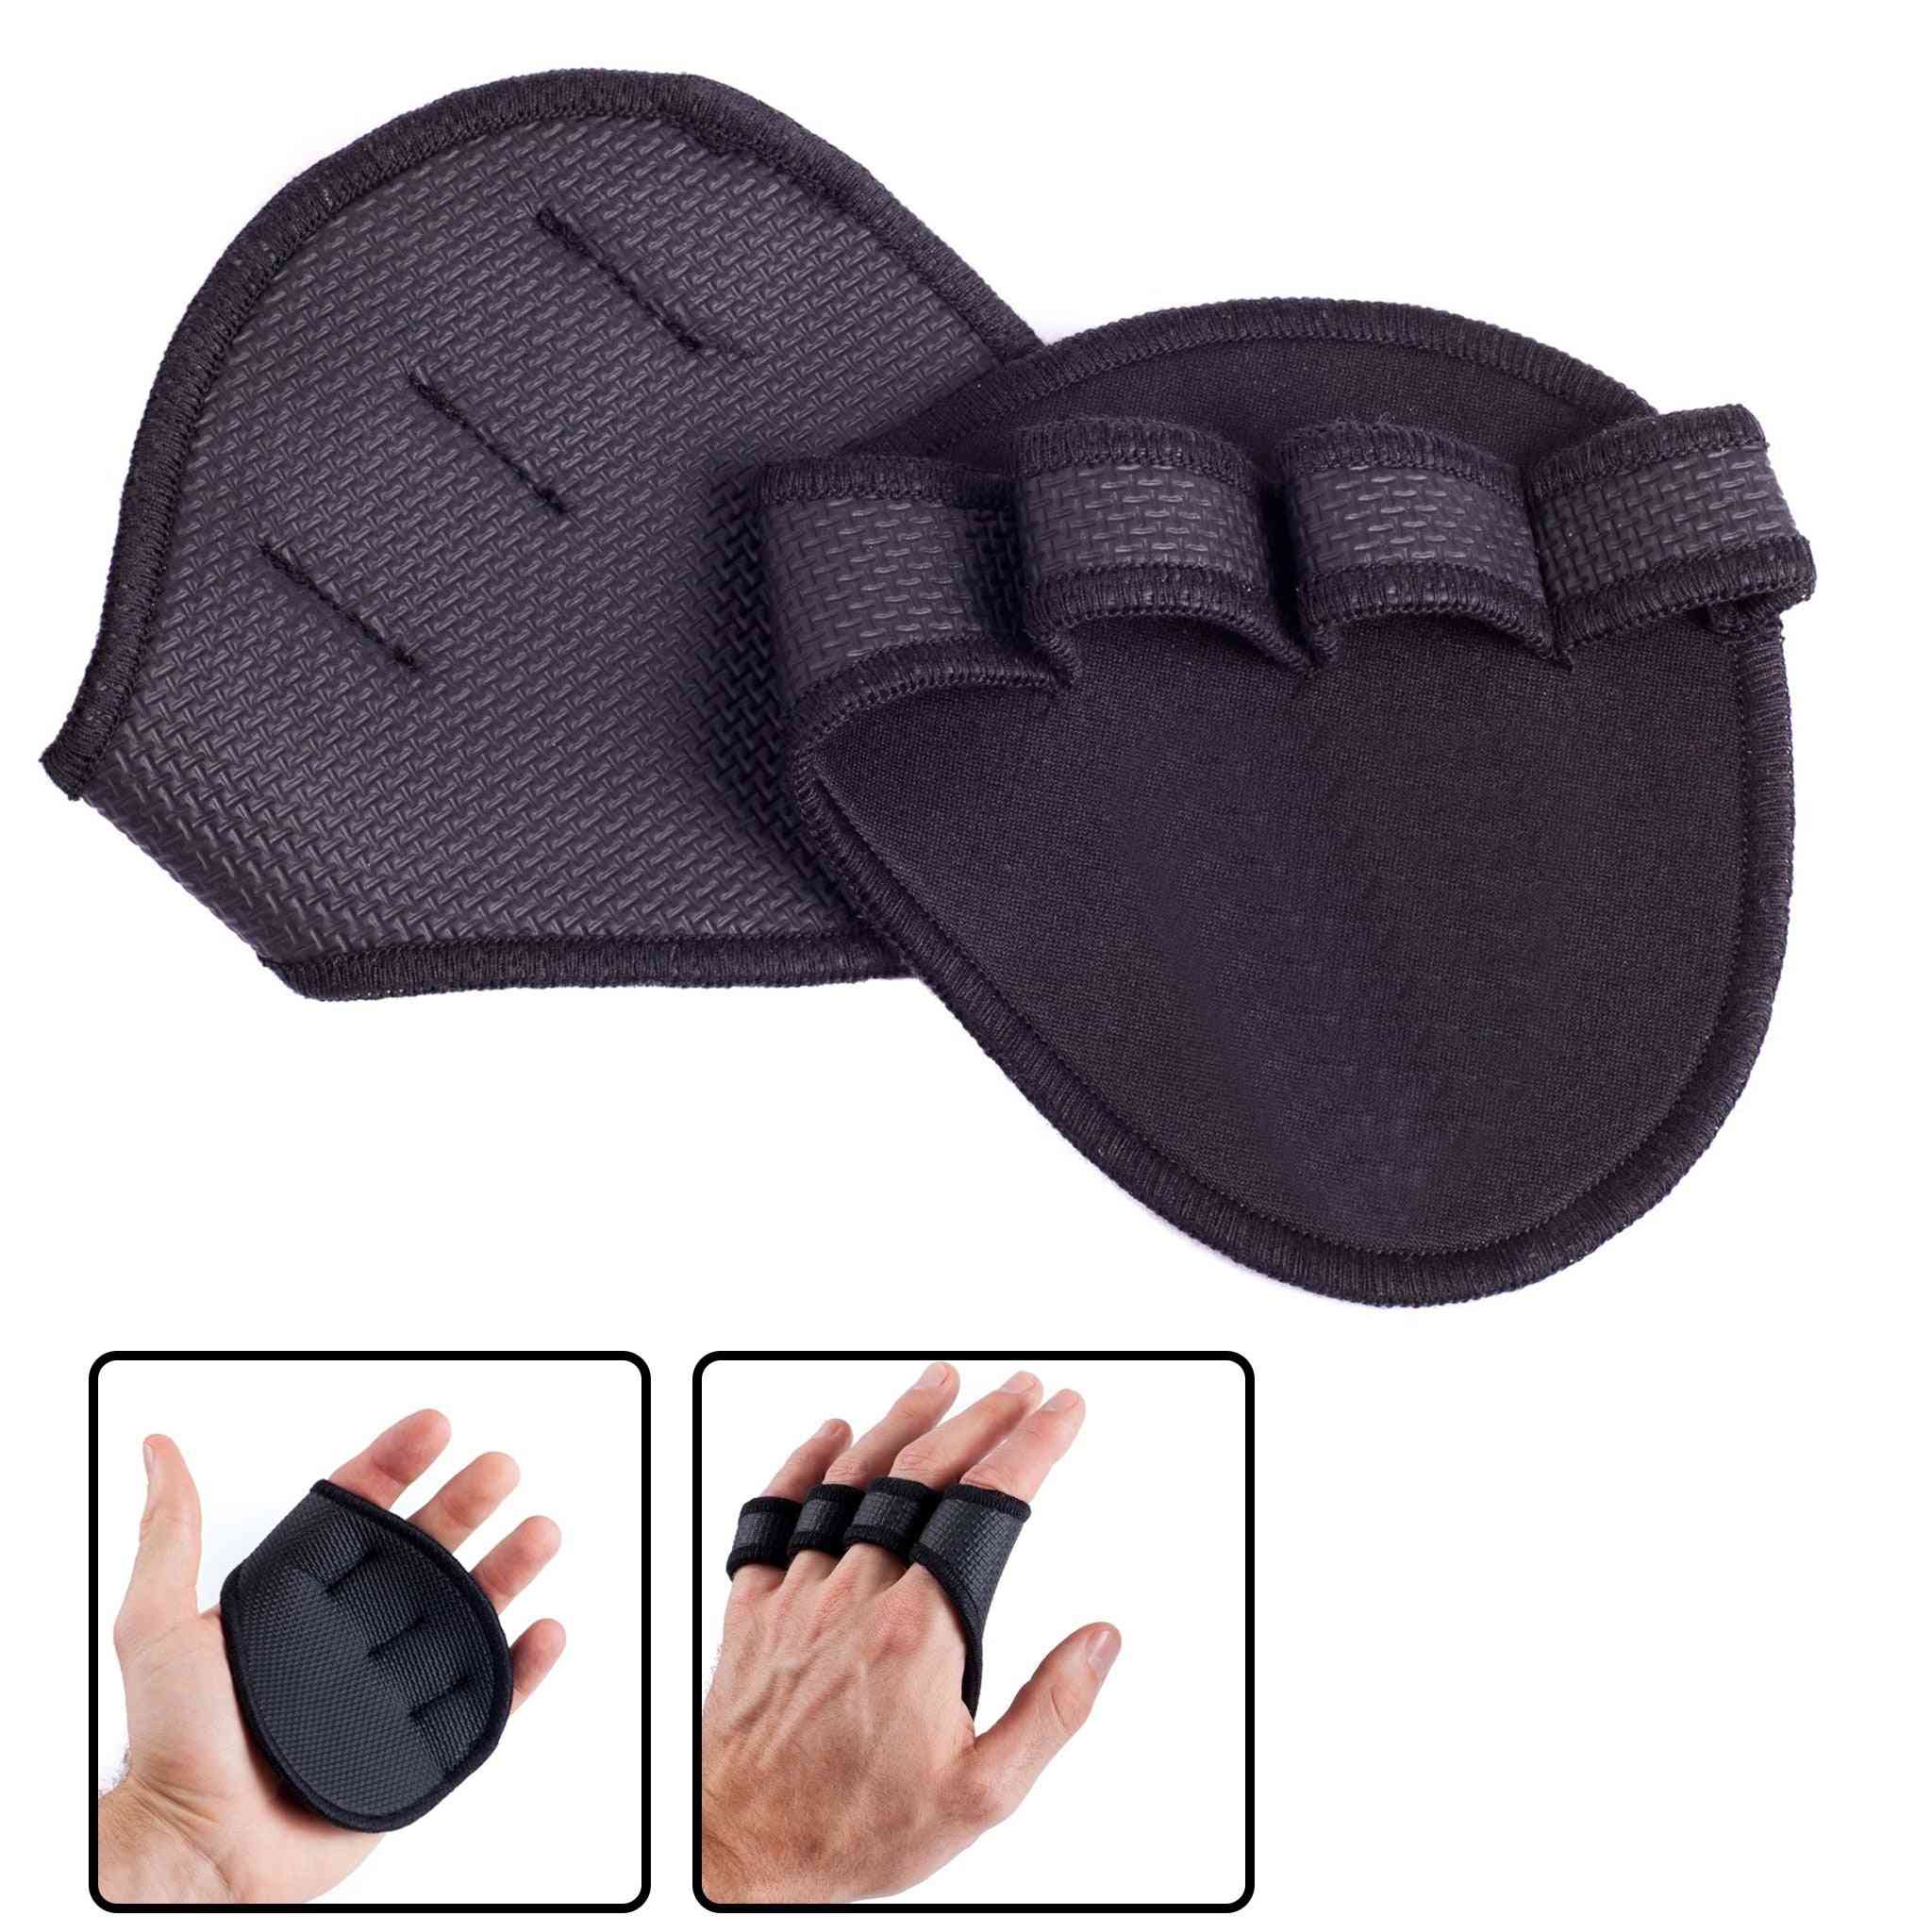 Lifting Palm- Dumbbell Grips Pads